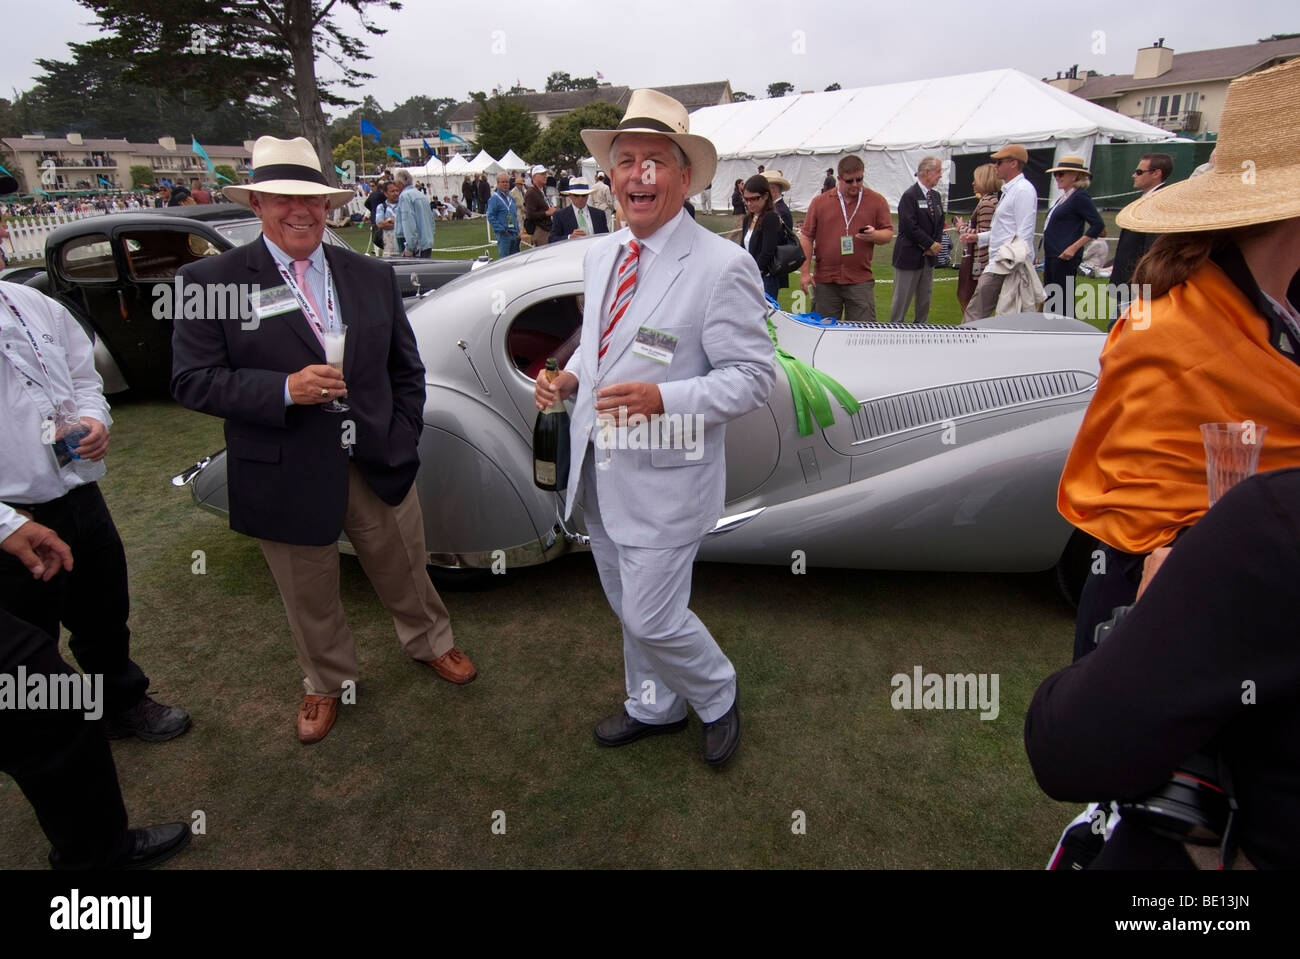 Owners of a winning car drink champagne in front of the Lodge at Pebble Beach during the 2009 Pebble Beach Concours d'Elegance Stock Photo